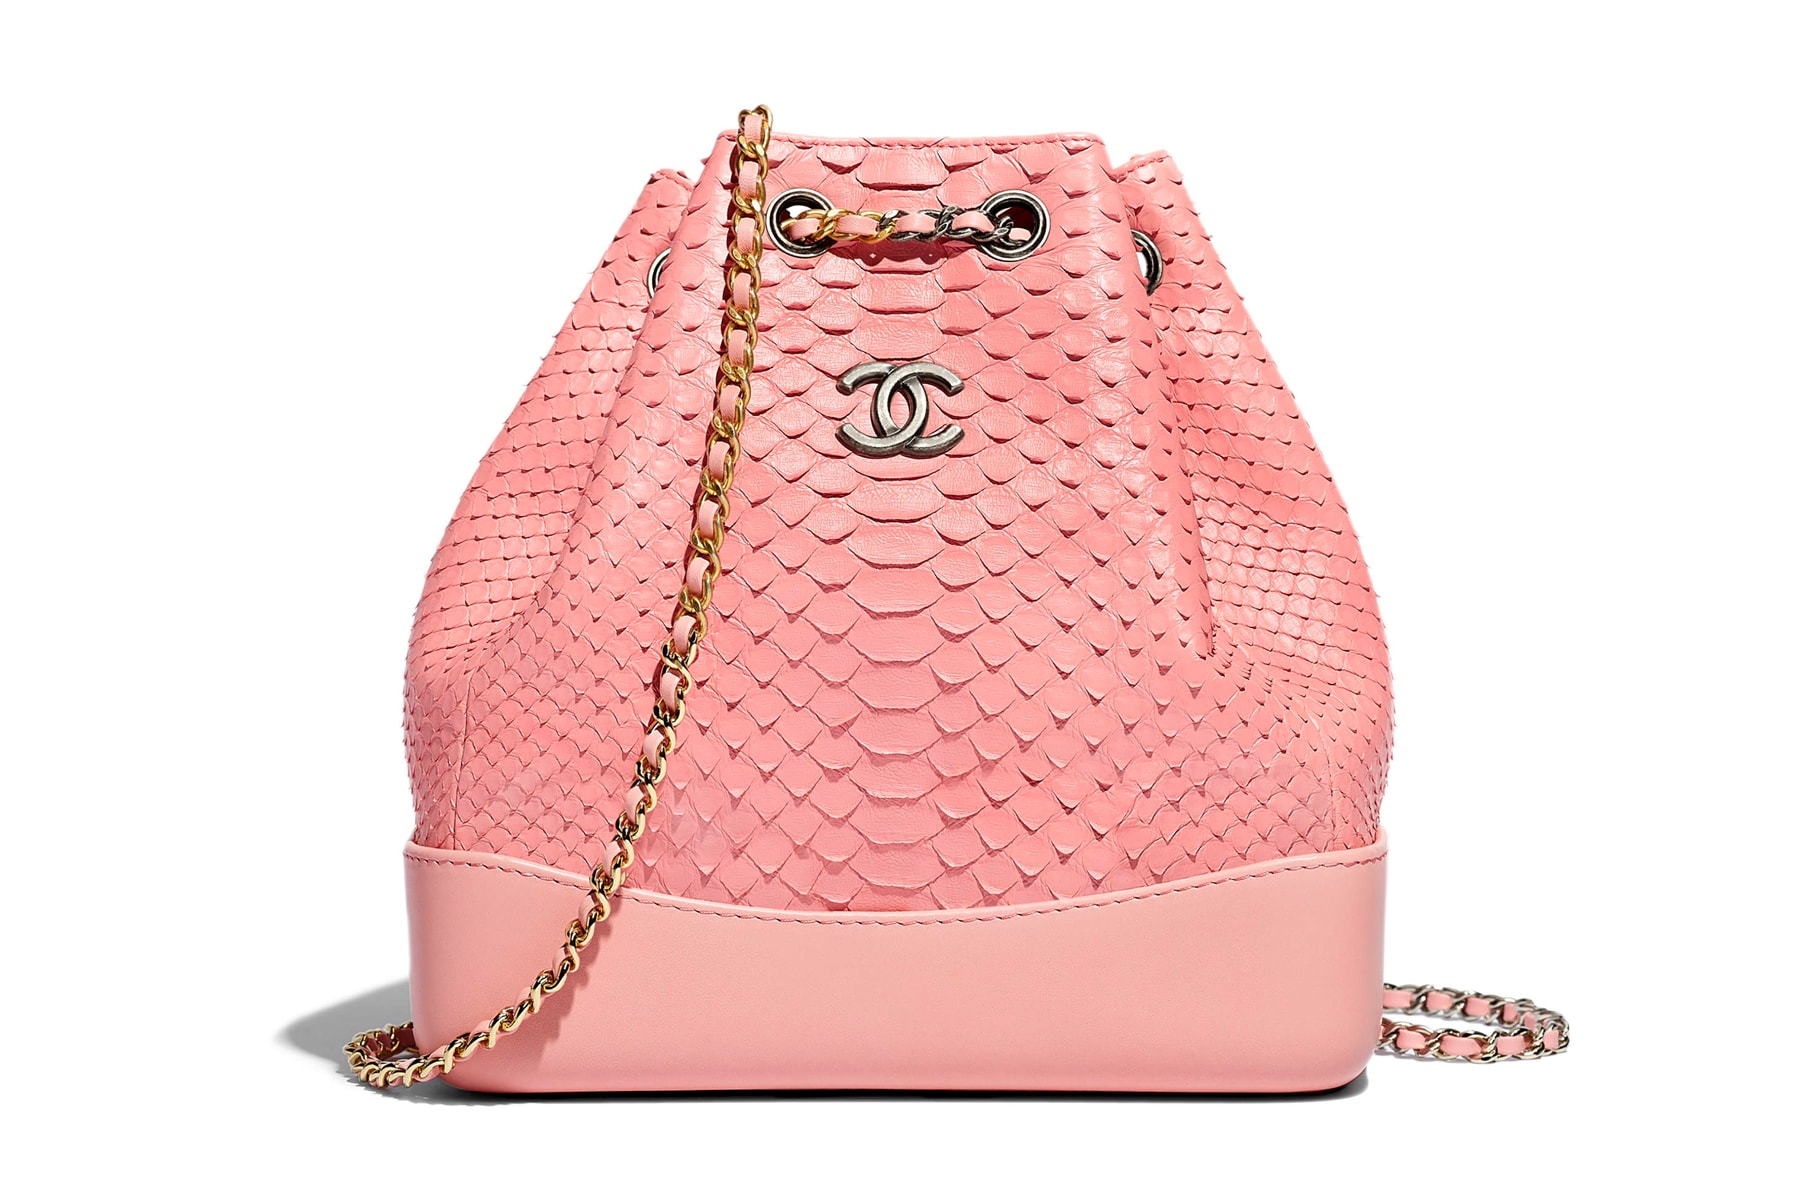 Chanel Gabrielle Backpack Pink Bag Spring Summer 2018 Pre Collection Pastel